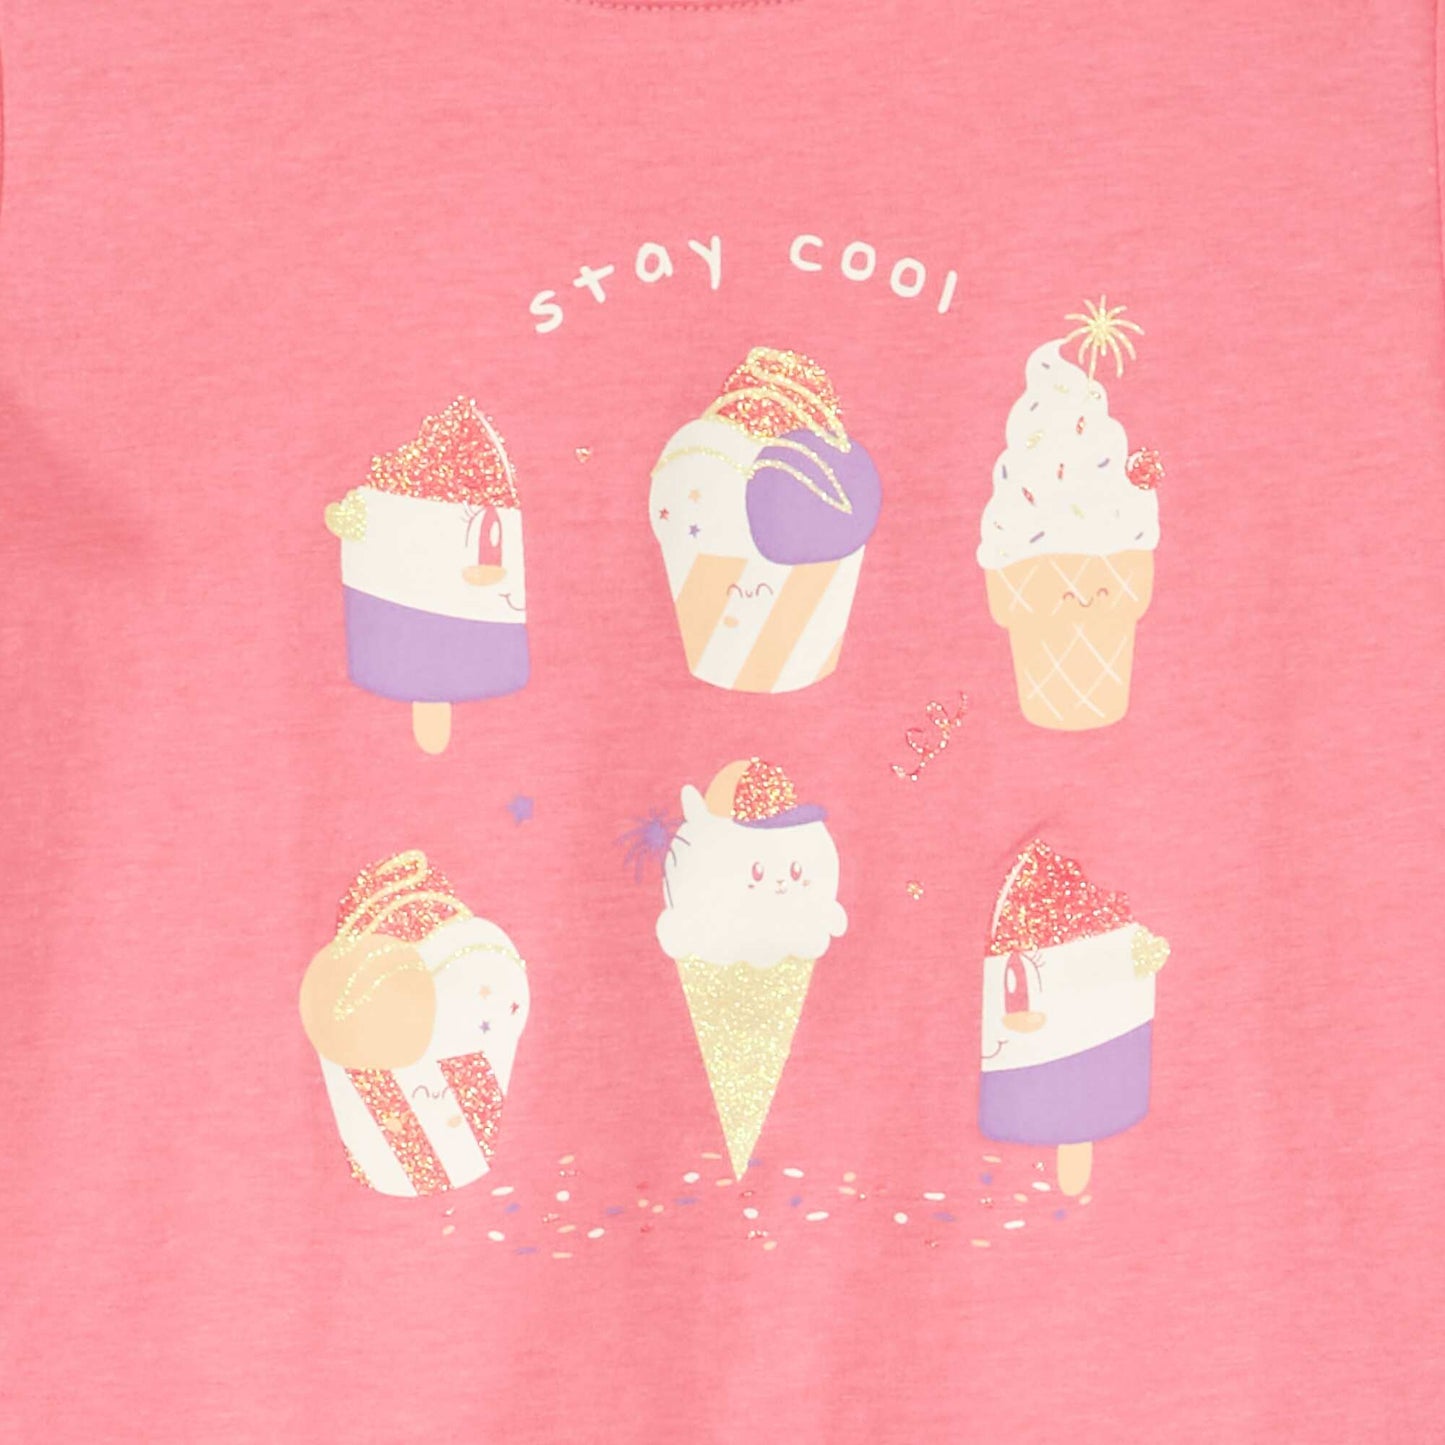 Jersey T-shirt with cute patterns PINK